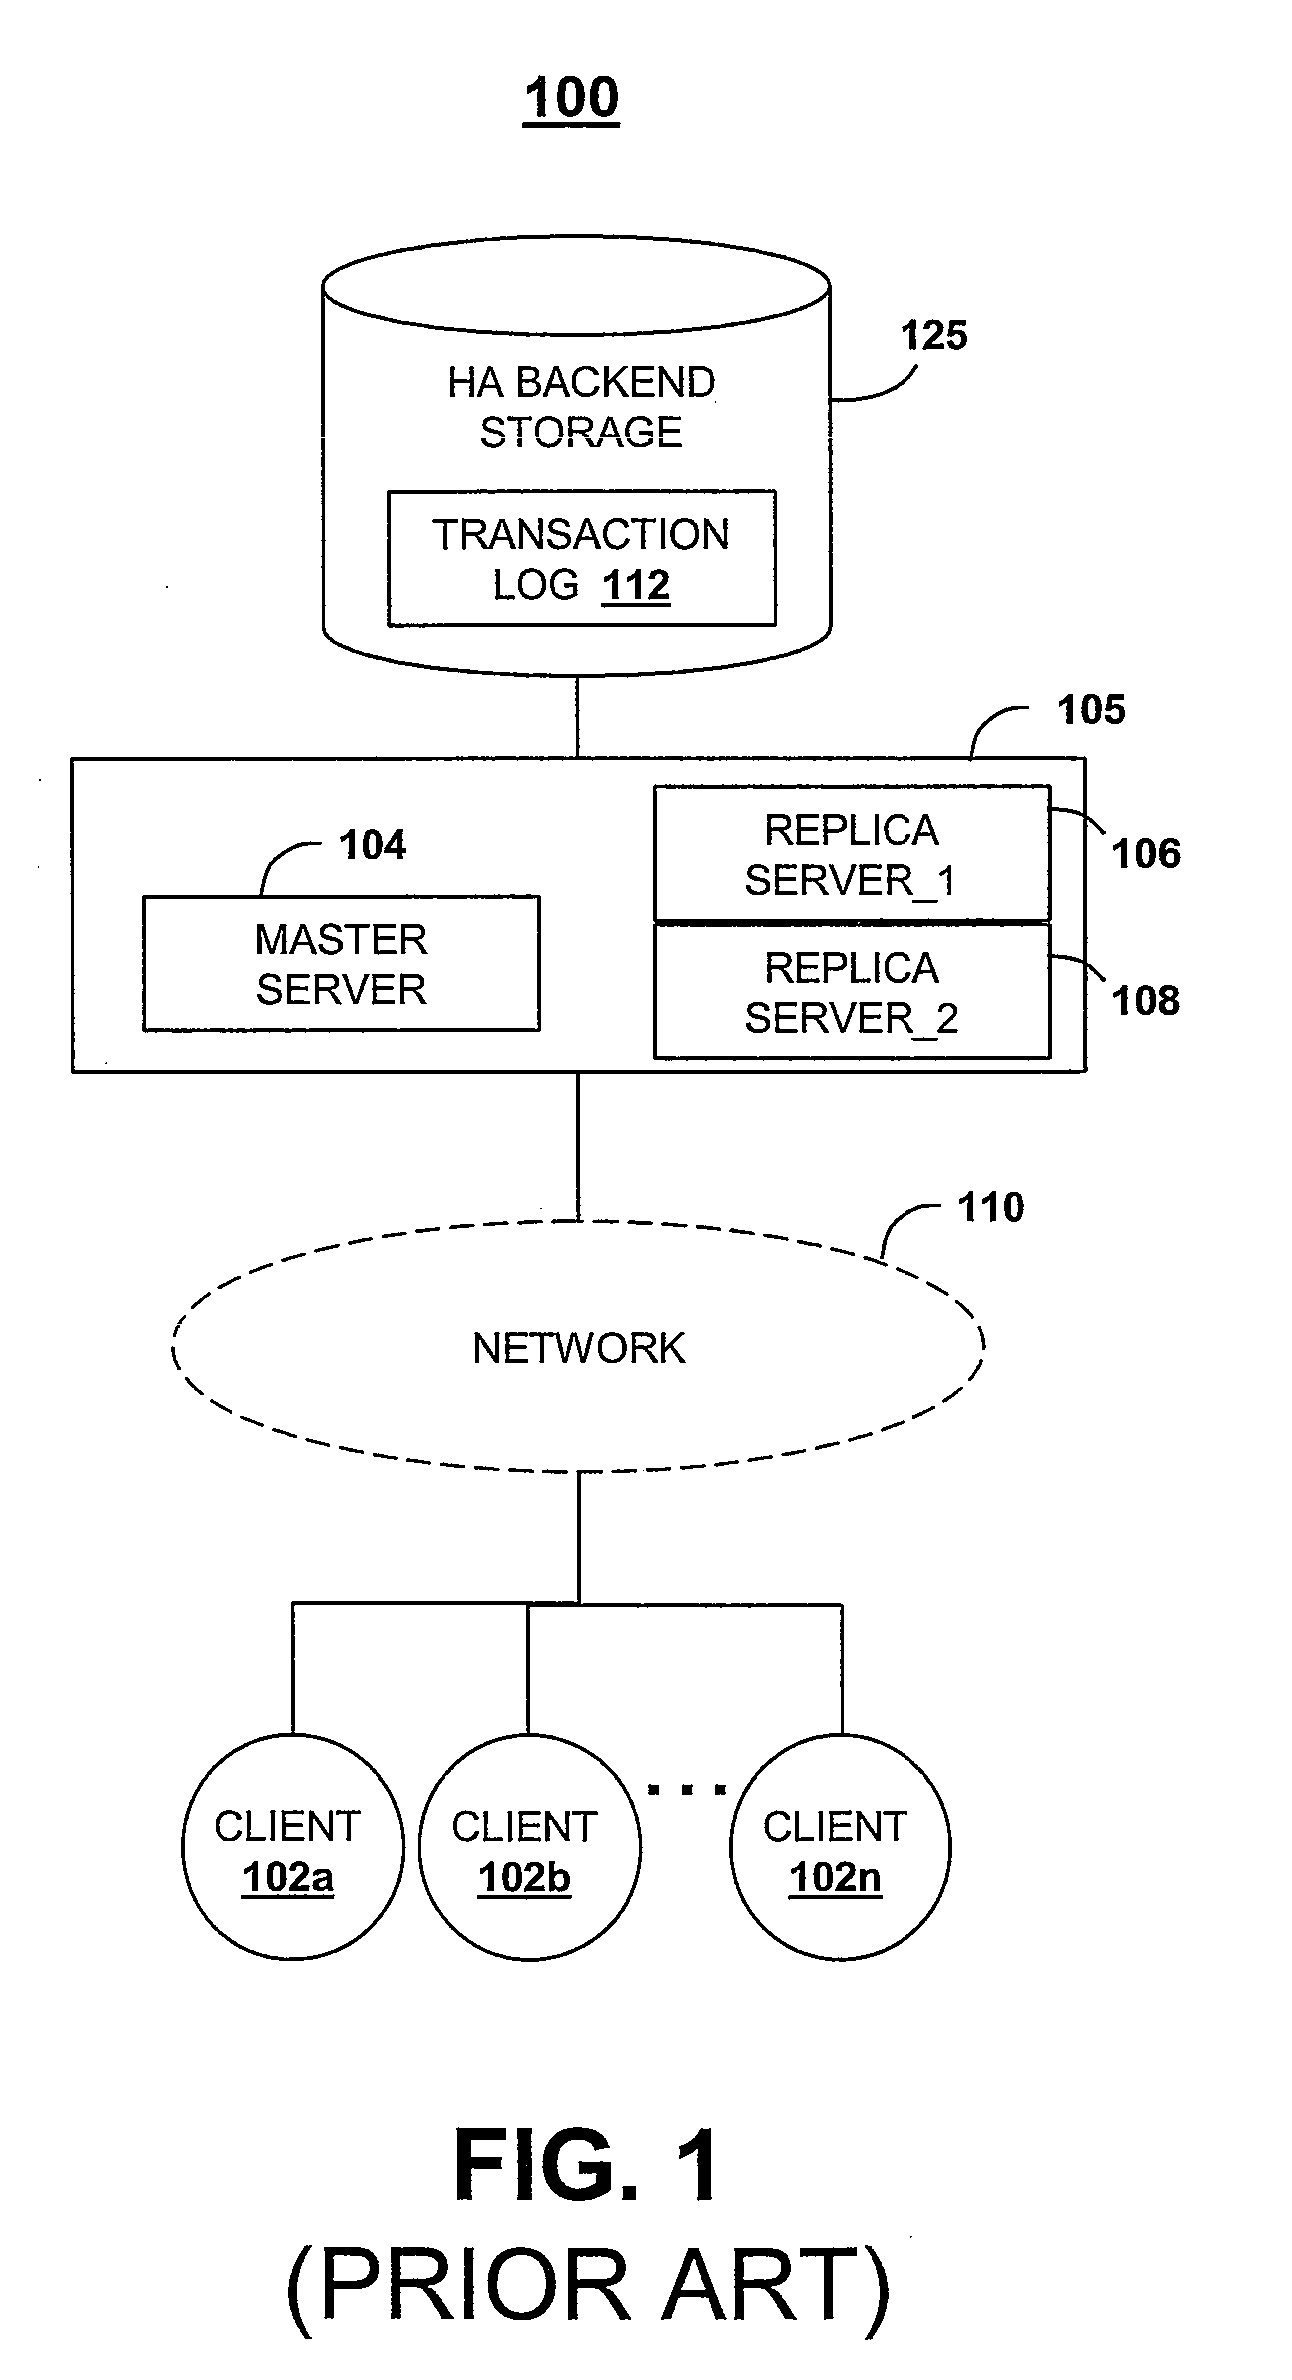 Method, System, and Computer Program Product for Ensuring Data Consistency of Asynchronously Replicated Data Following a Master Transaction Server Failover Event